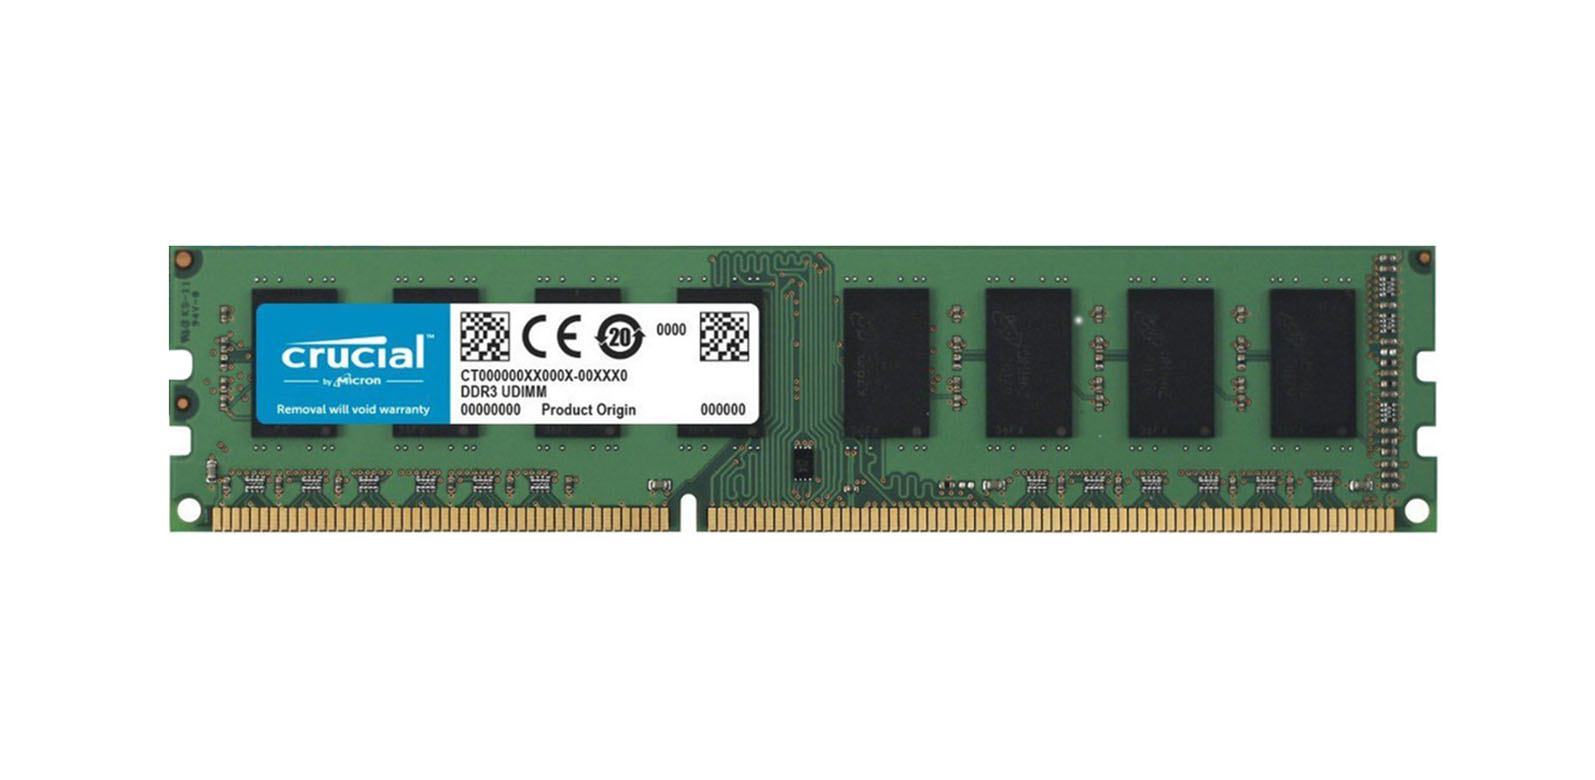 Crucial CT4862044 8GB DDR3-1600MHz PC3-12800 ECC Registered CL11 240-Pin DIMM 1.35V Low Voltage Dual Rank Very Low Profile (VLP) Memory Module Upgrade for Supermicro SuperStorage Server 6027R-E1R12N